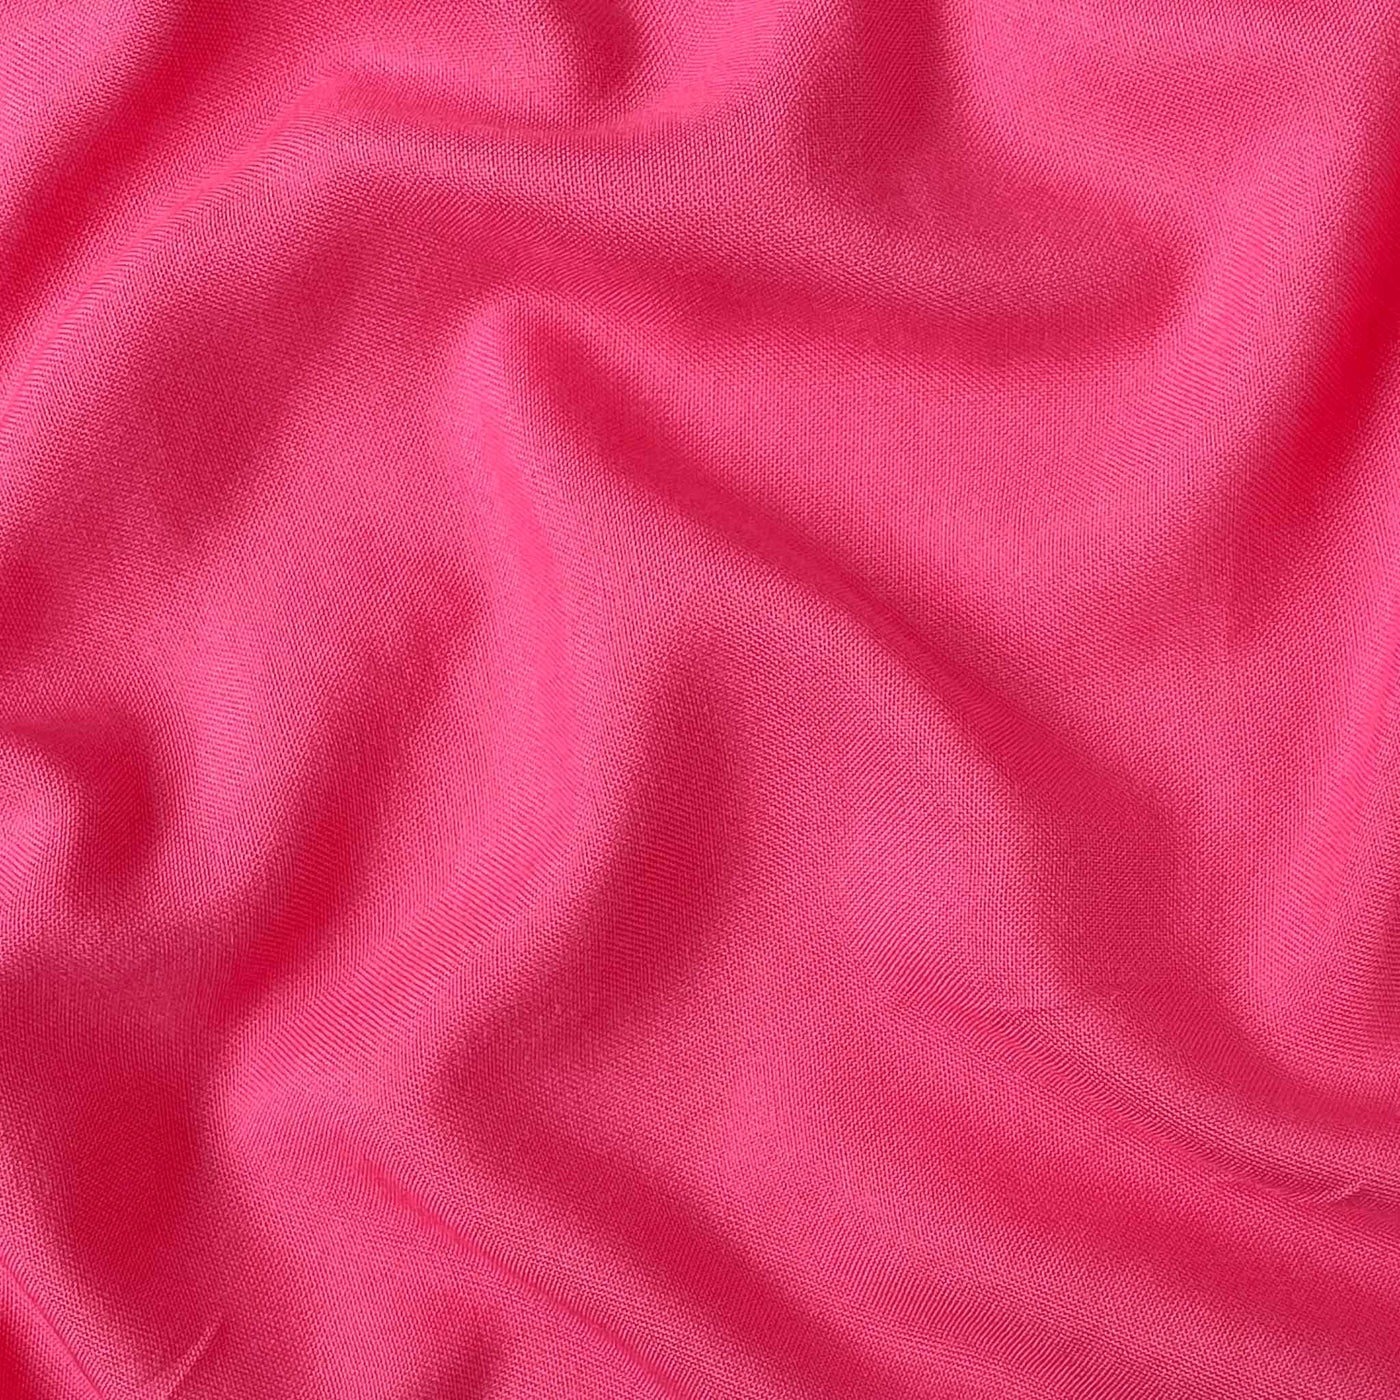 Fabric Pandit Fabric Hot Pink Color Pure Rayon Fabric (Width 42 Inches)